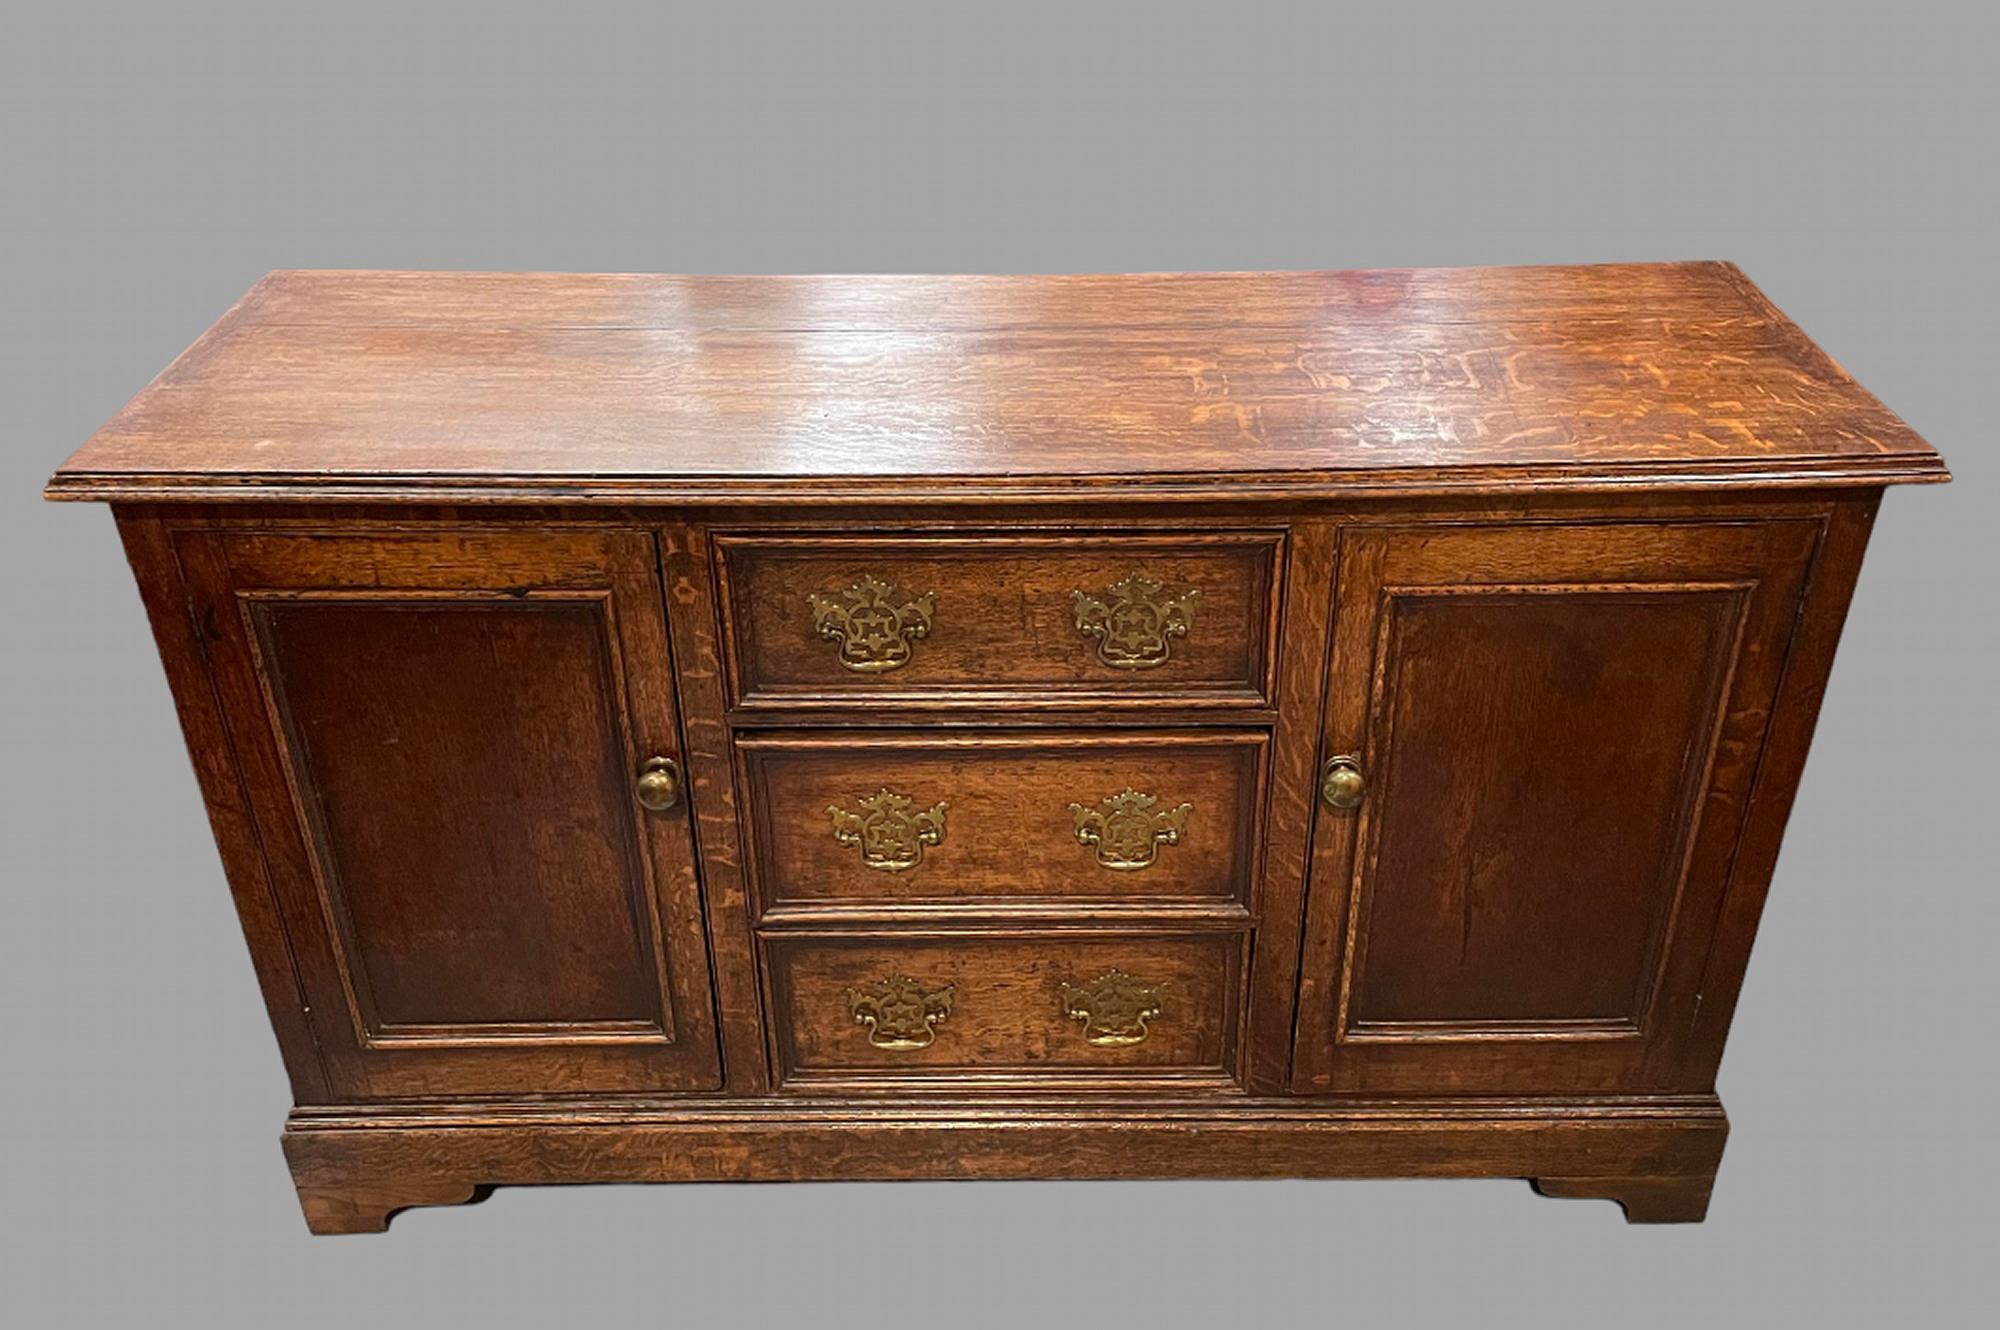 An Early 19th century Oak Dresser Base, the top with a moulded edge with three central drawers with original handles flanked by two cupboards each with a shelf, brass handles on bracket feet.